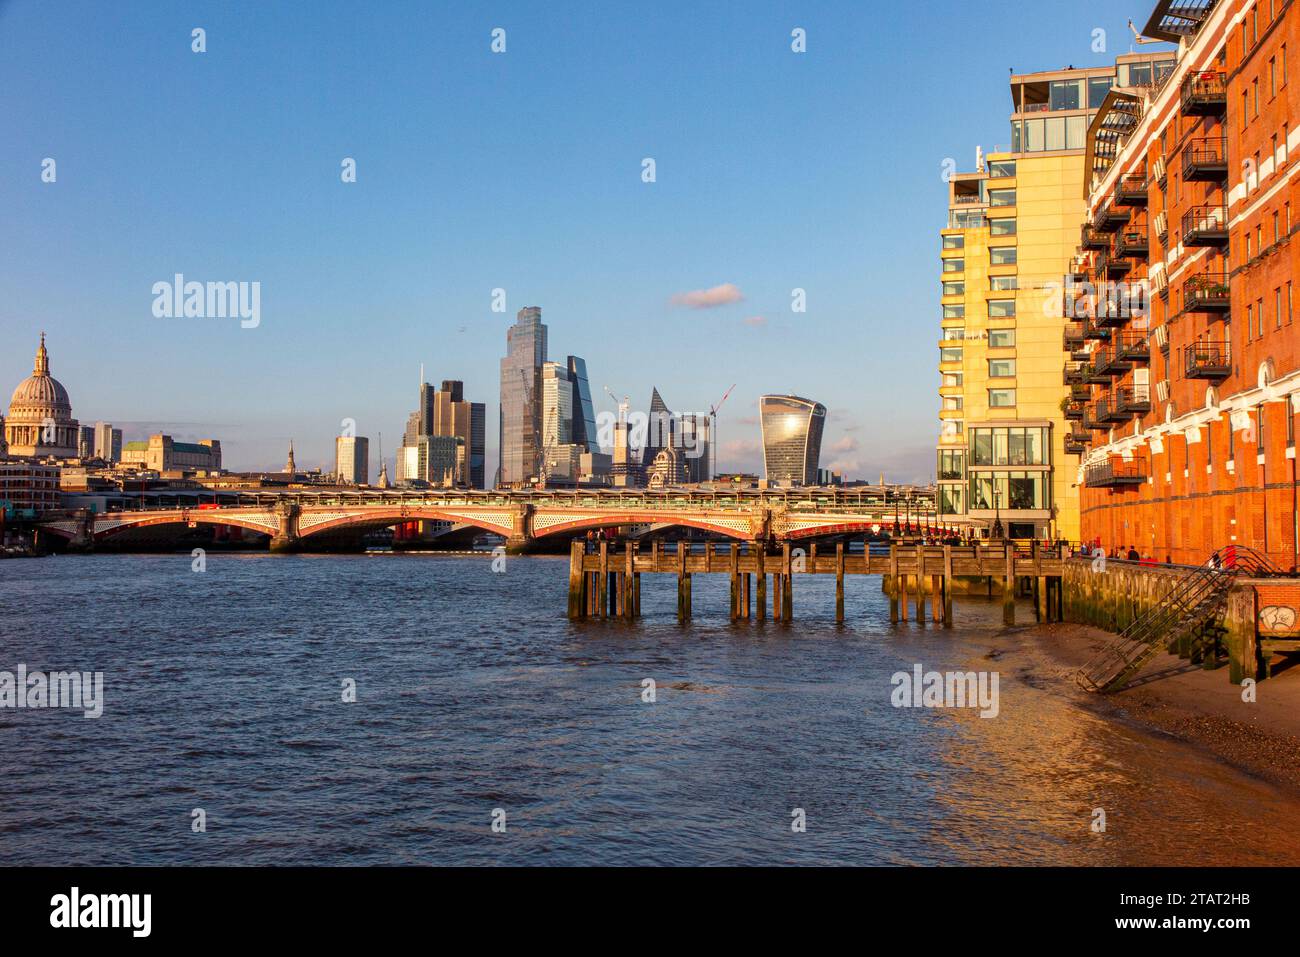 The City of London with Blackfriars Bridge in the foreground Stock Photo